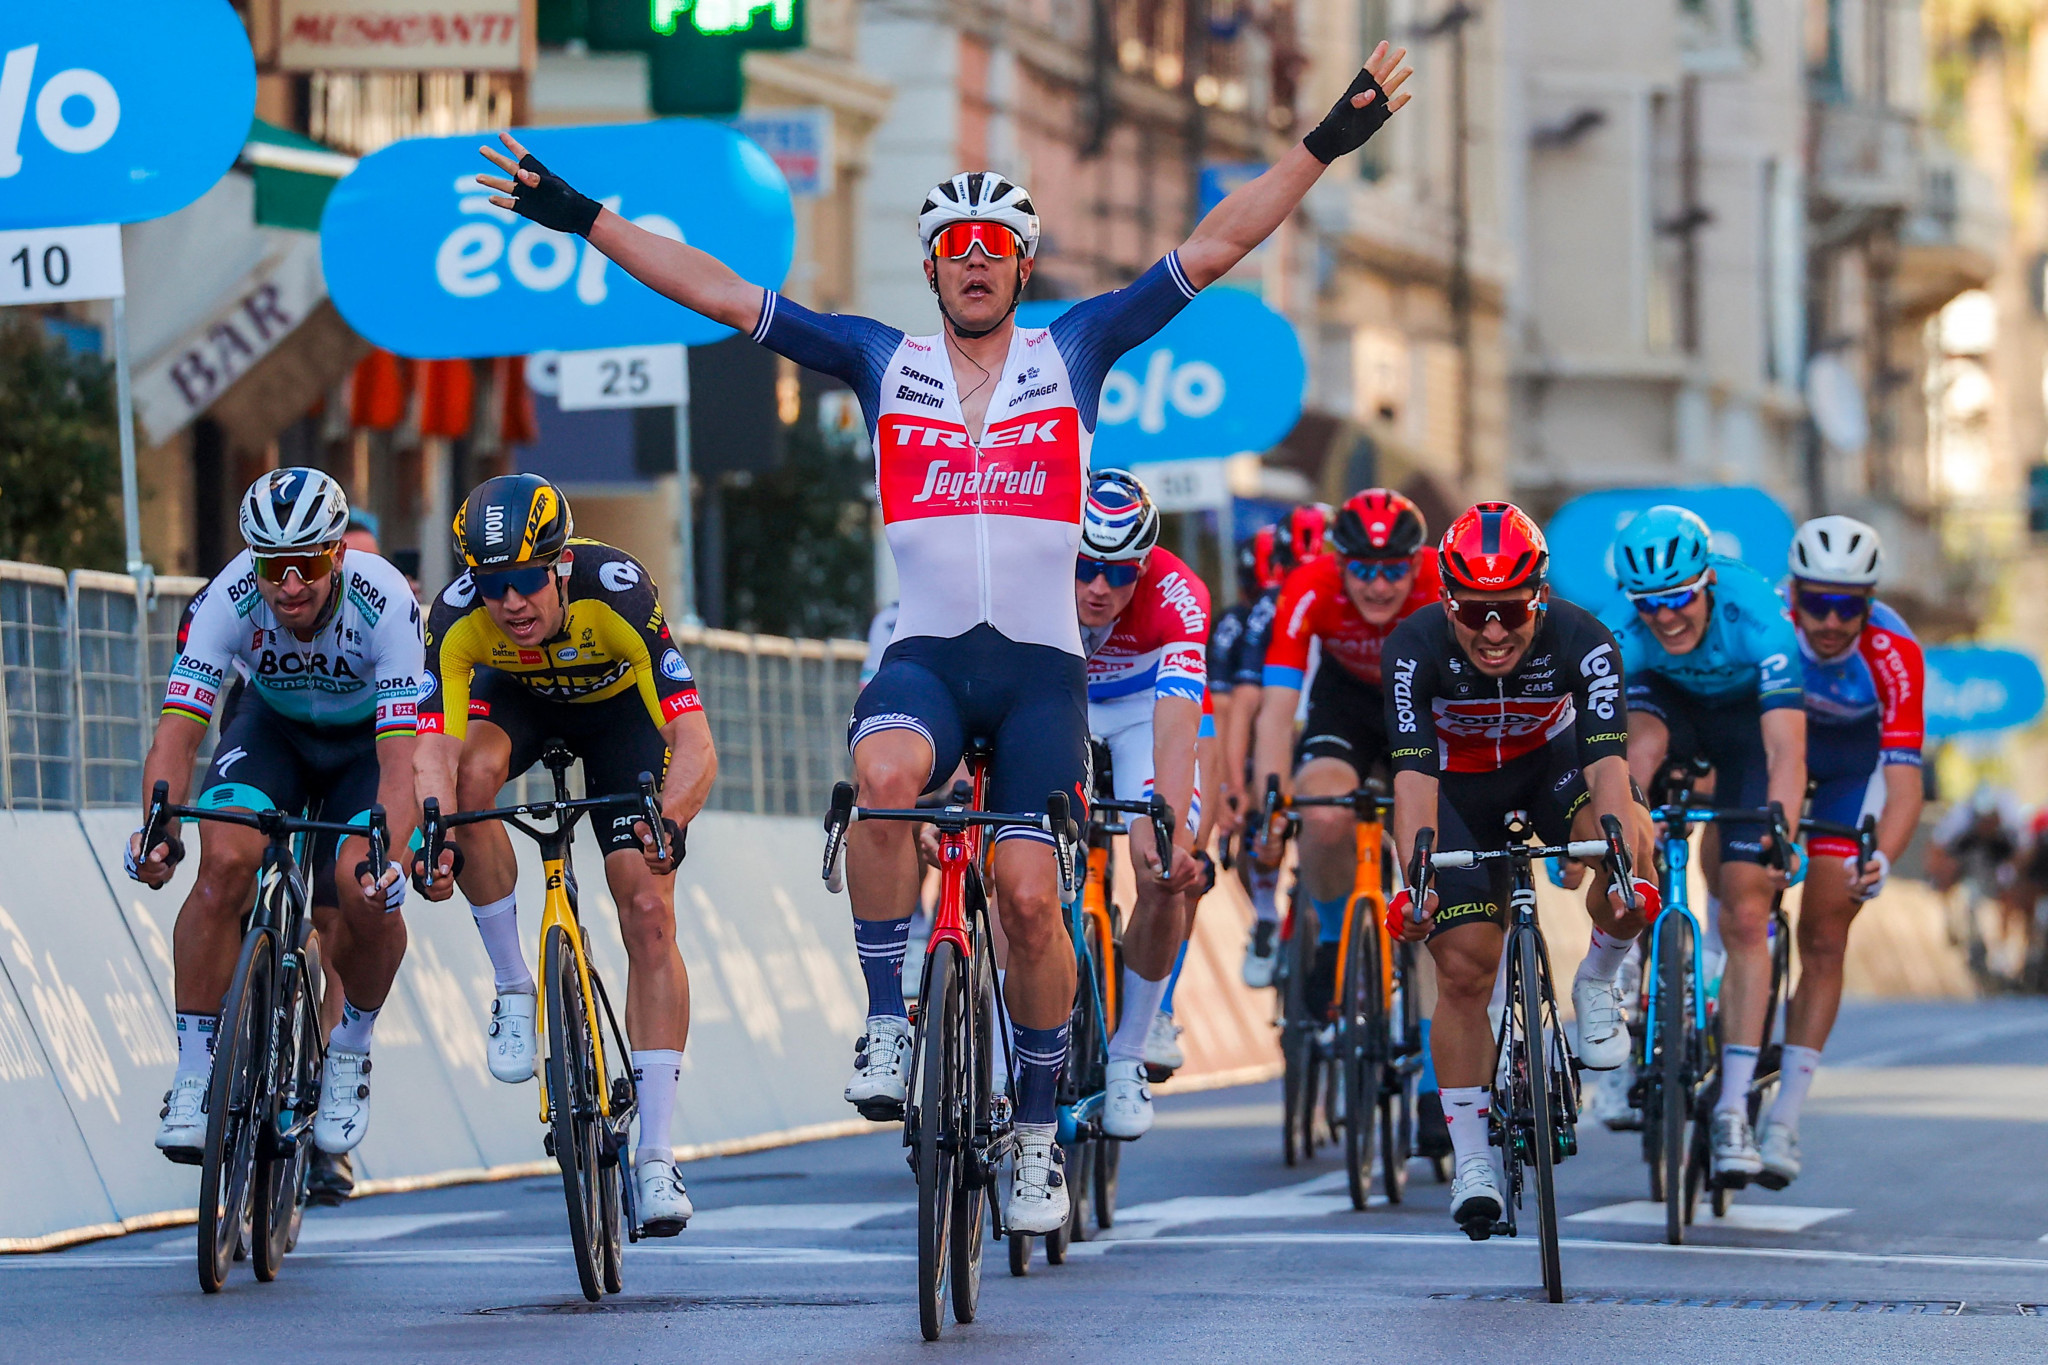 Stuyven wins Milan-San Remo after late attack